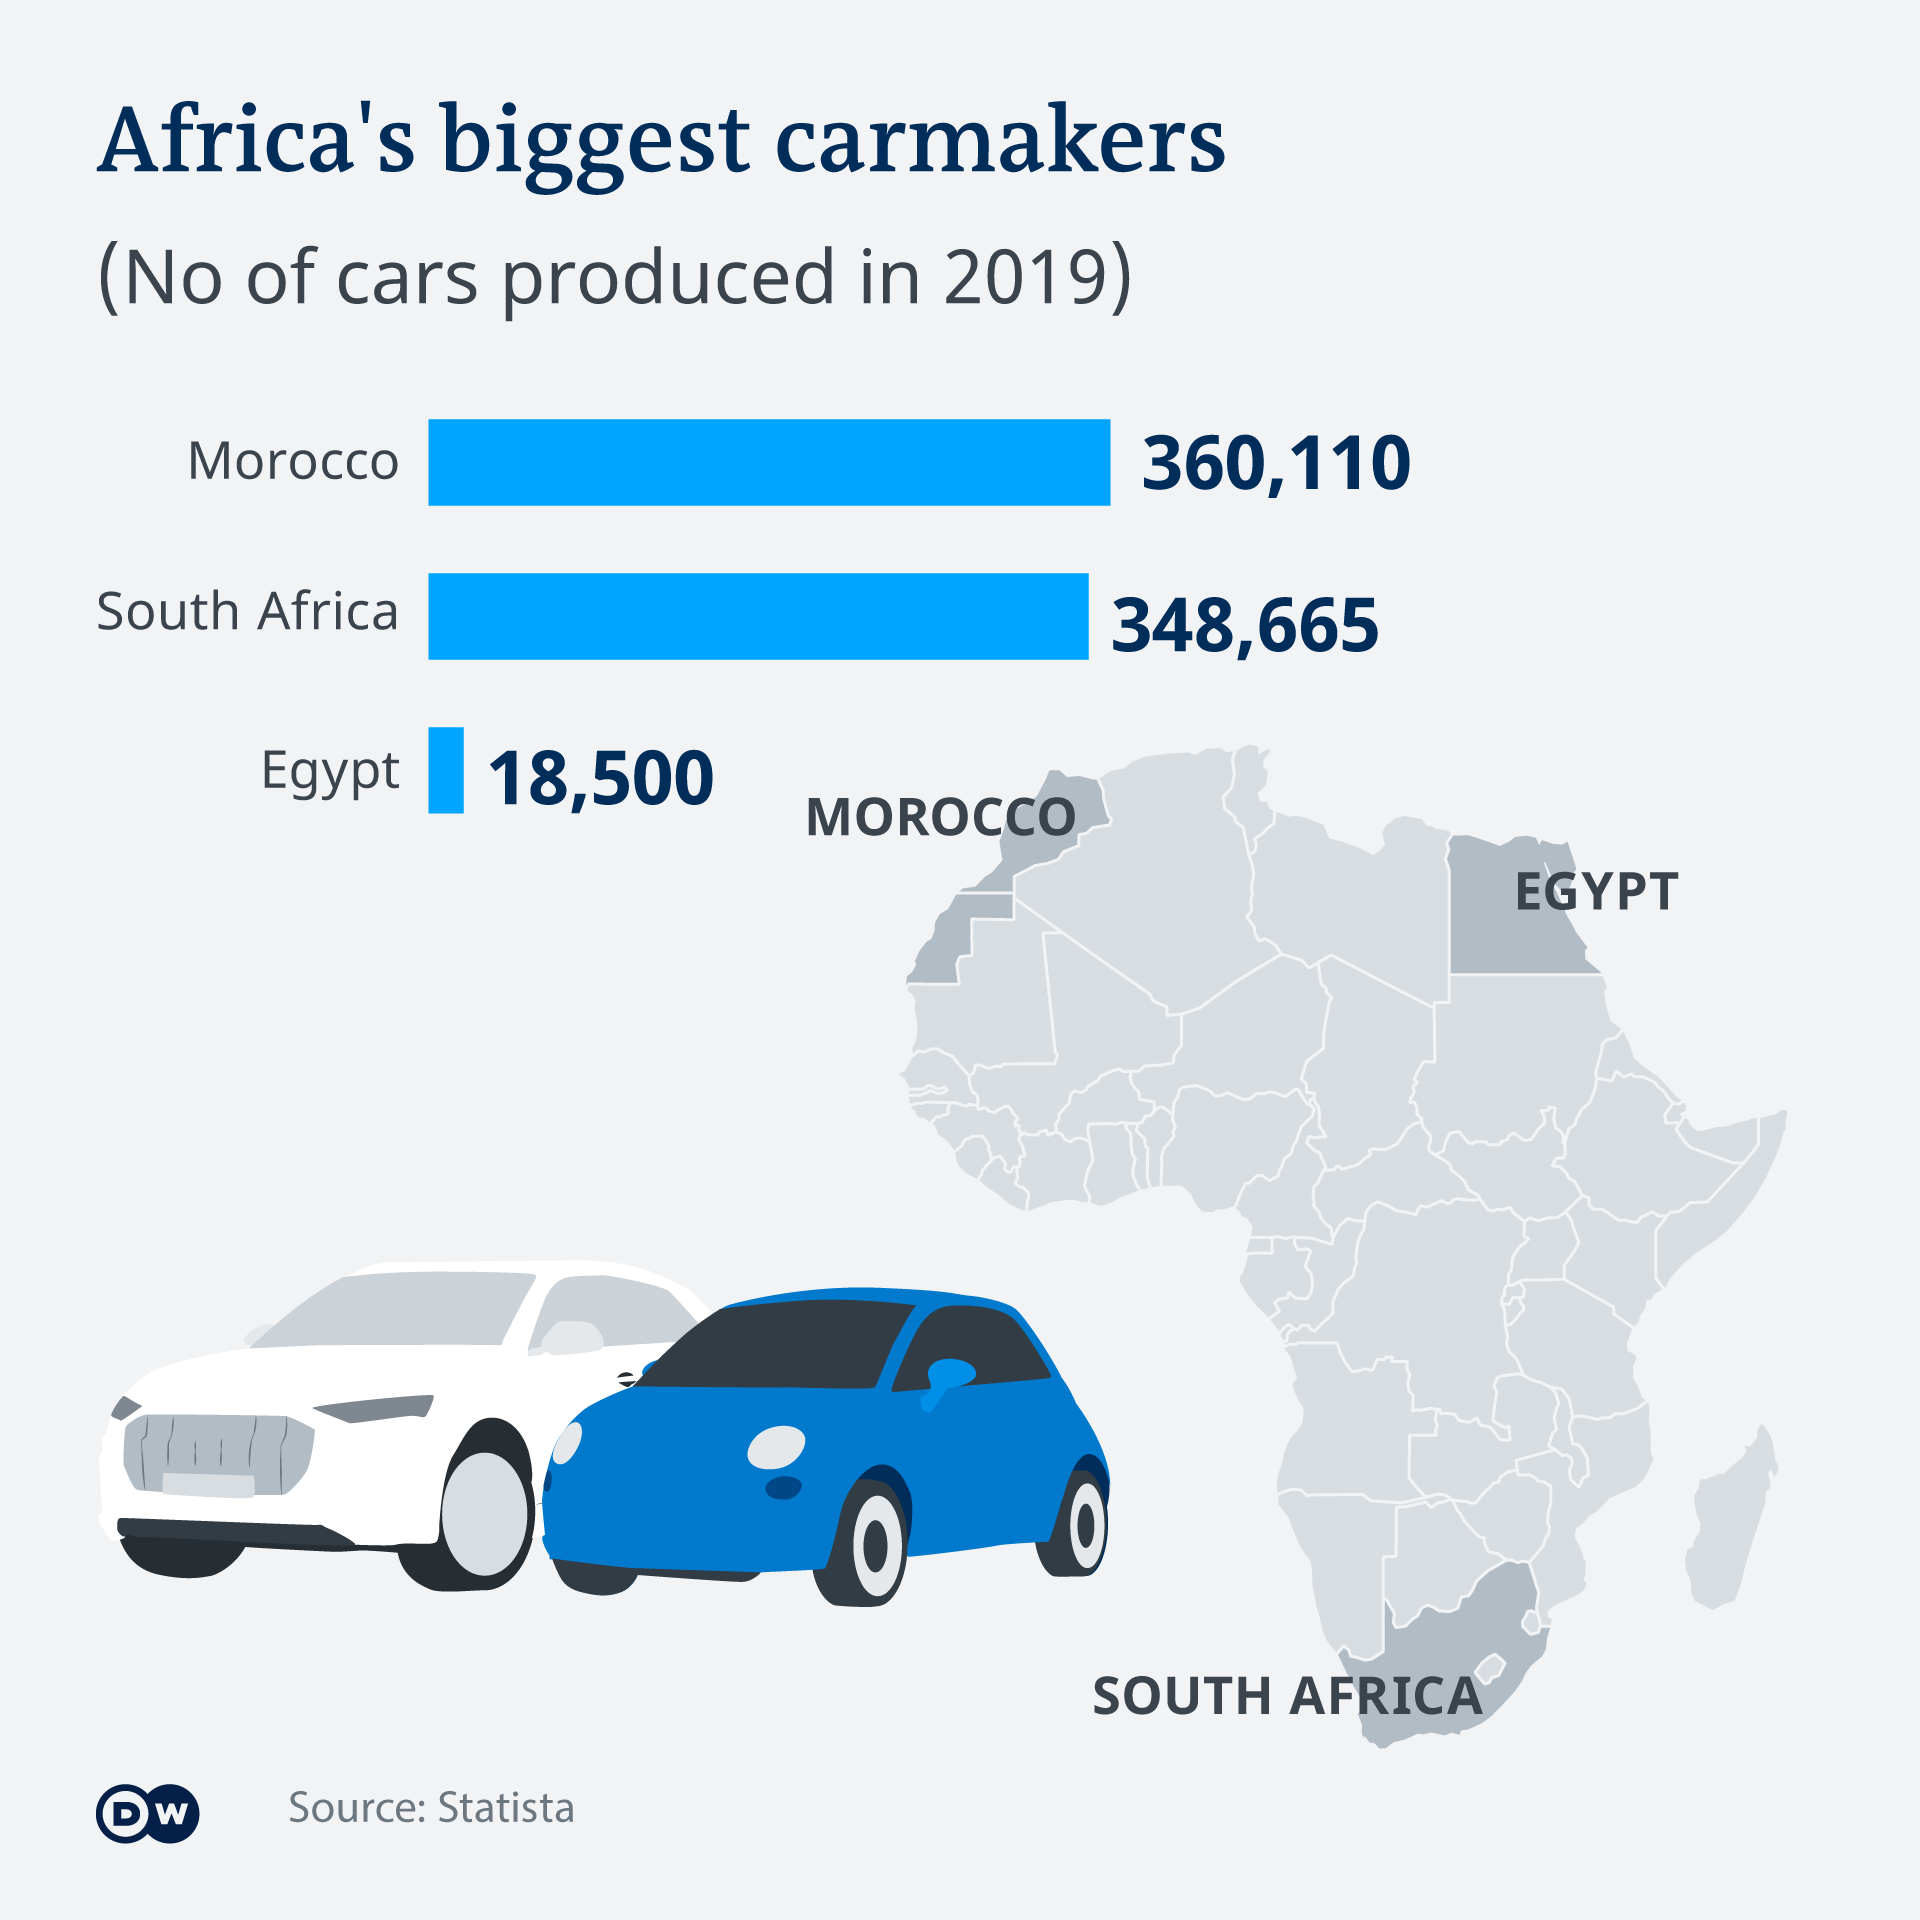 An infographic showing Africa's biggest automakers